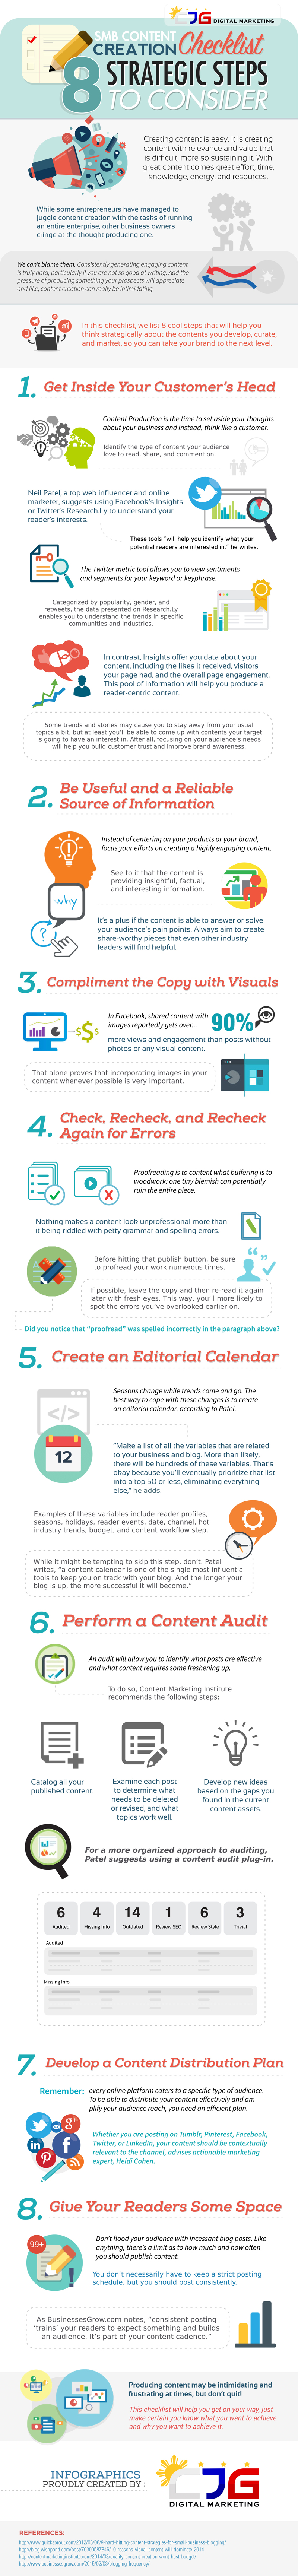 SMB Content Creation Checklist – 8 Strategic Steps to Consider (Infographic) - An Infographic from CJG Digital Marketing